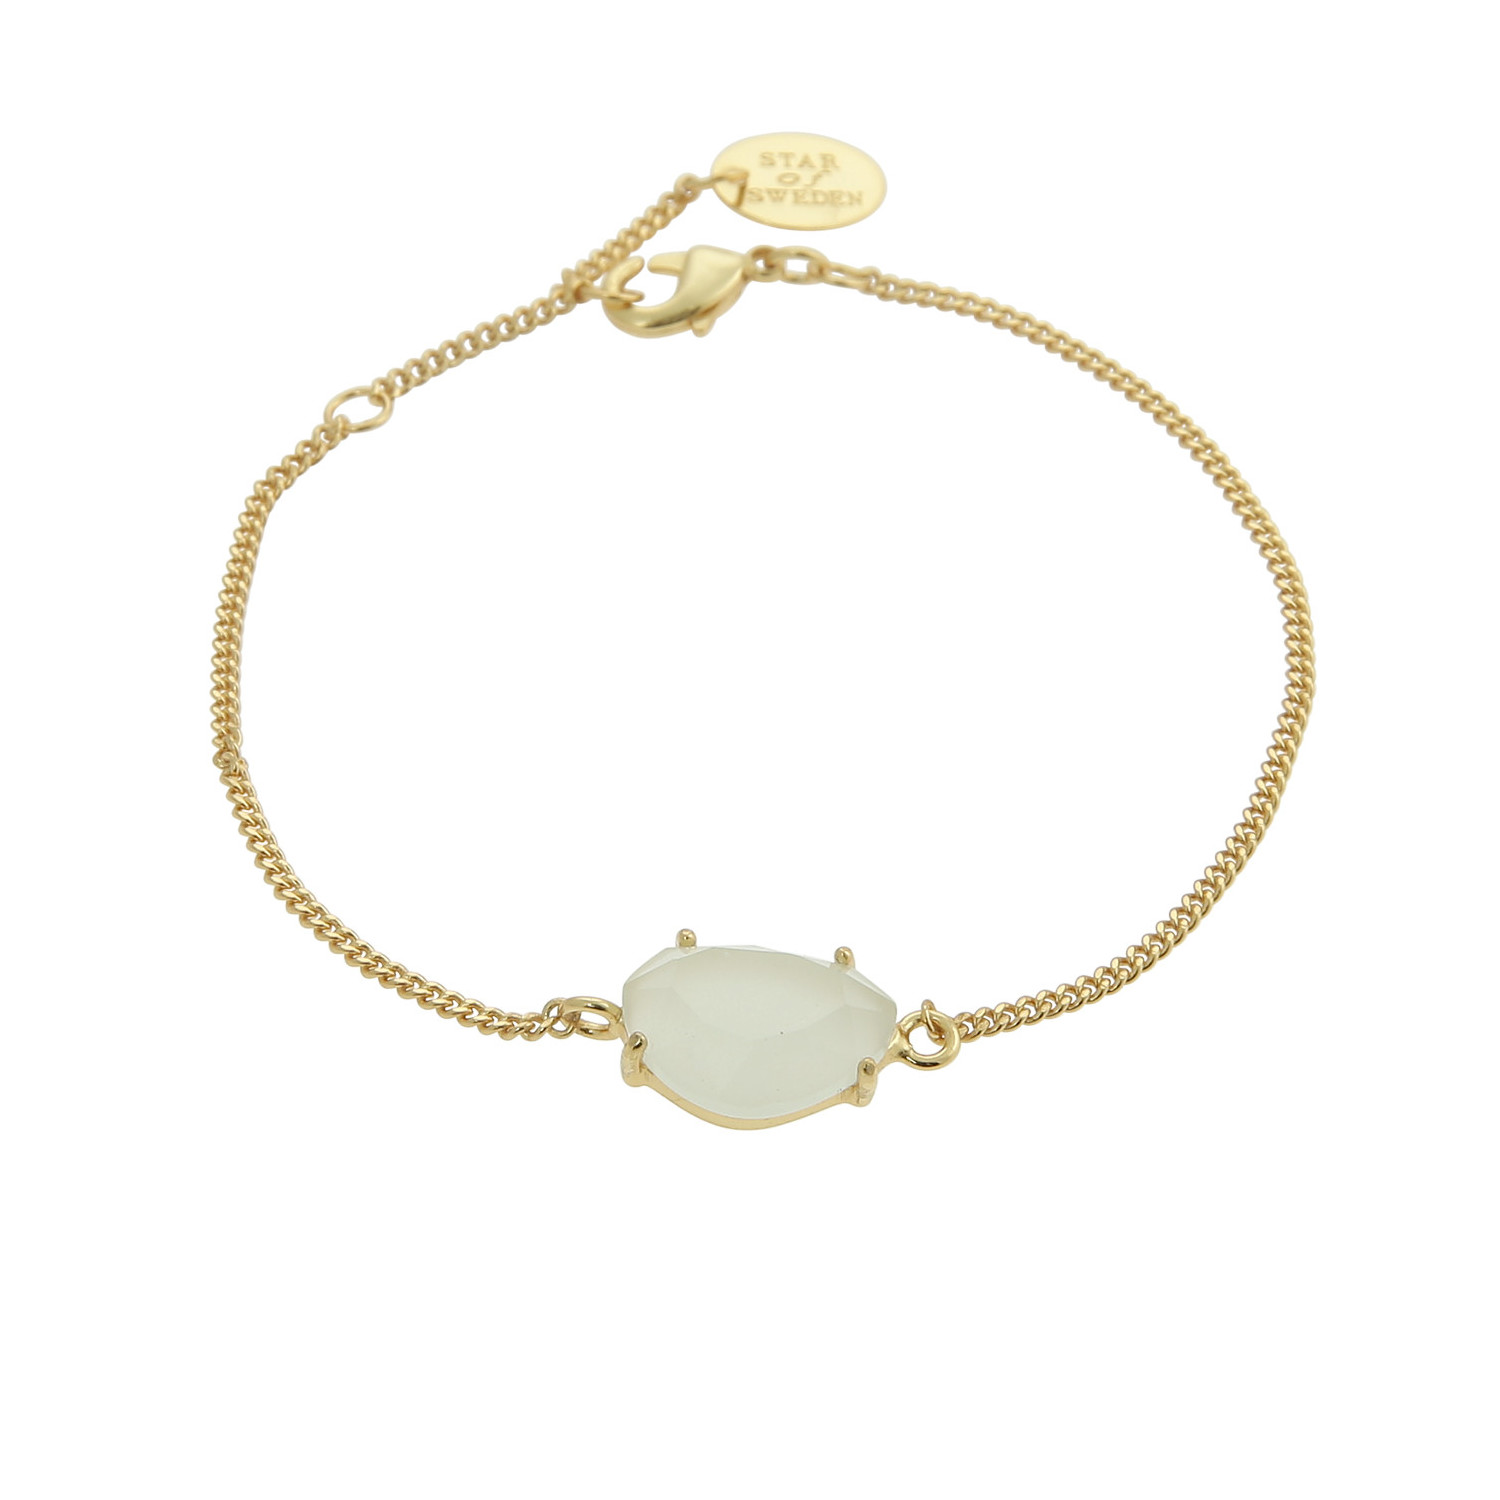 Gold bracelet with green stone